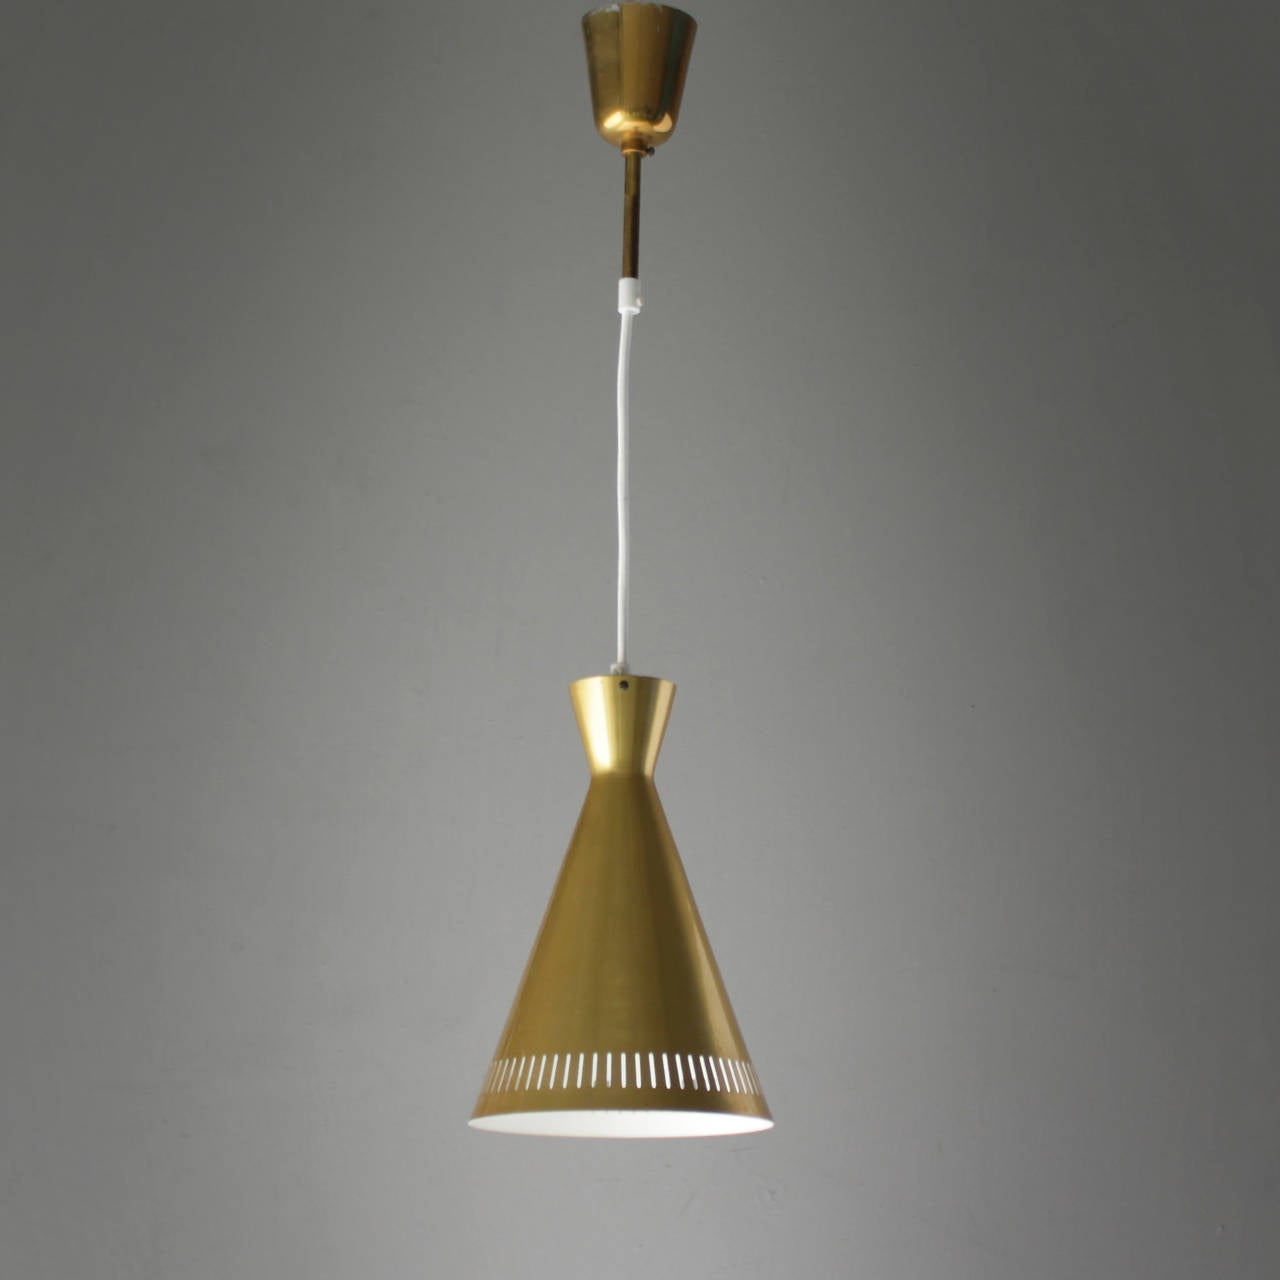 Pair of brass Scandinavian diabolo pendants. Rewired with cotton wire. Measurements fixture: height 10.3 in. (26 cm), diameter: 6.8 inches. (17,3 cm). Length from ceiling till drop:  50 inches (127 cm).